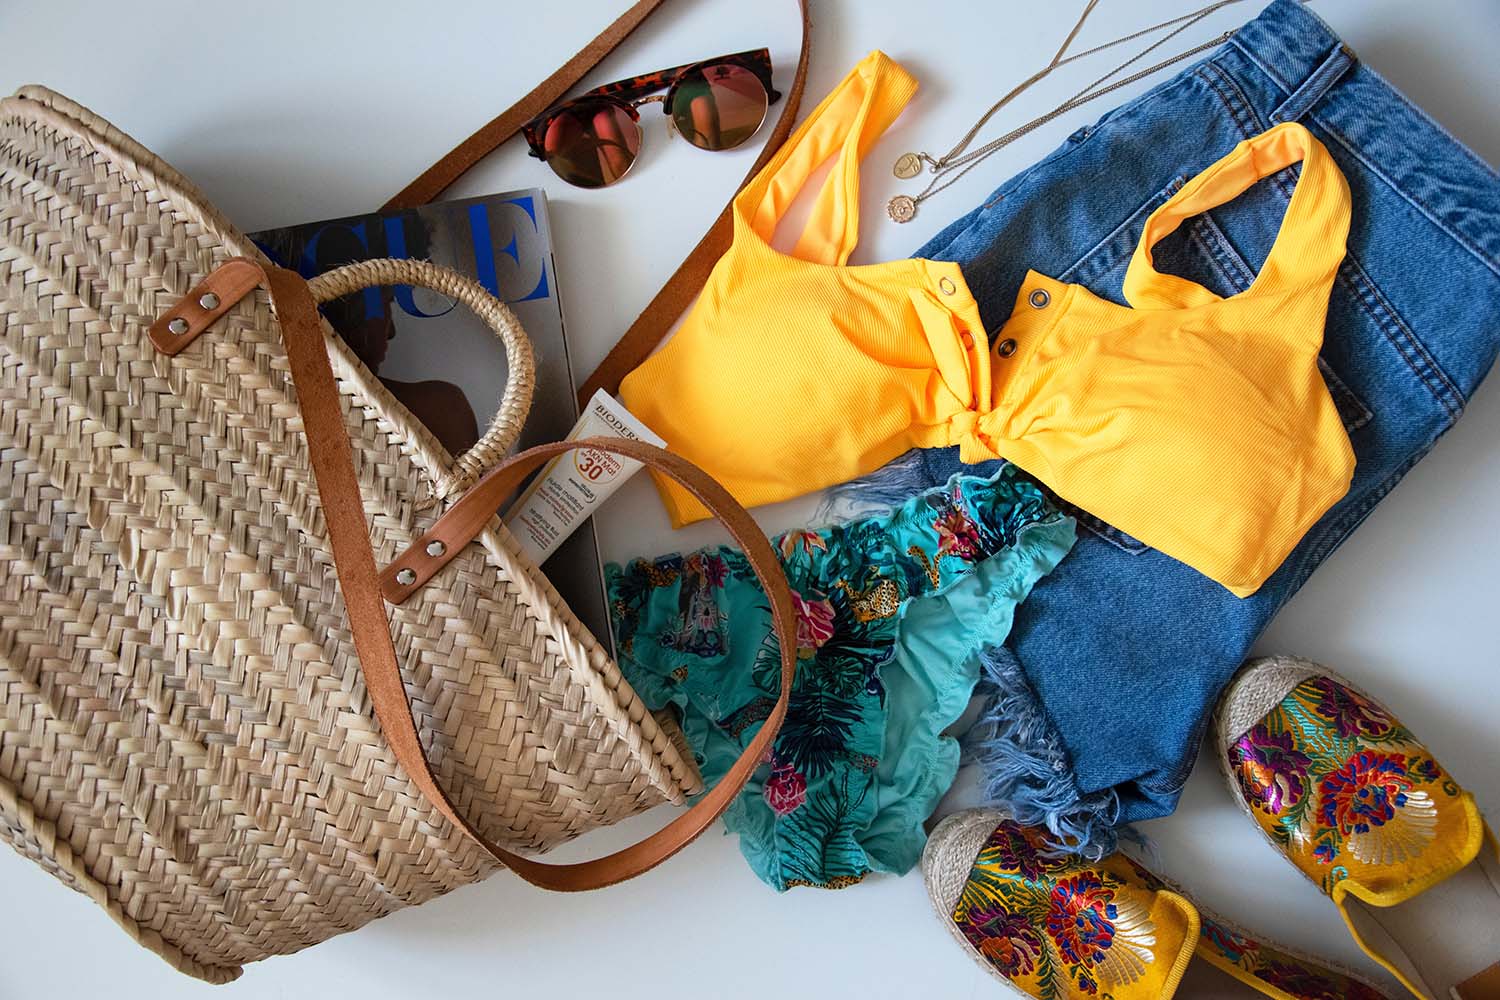 20 Summer Clothing Tips You Should Know